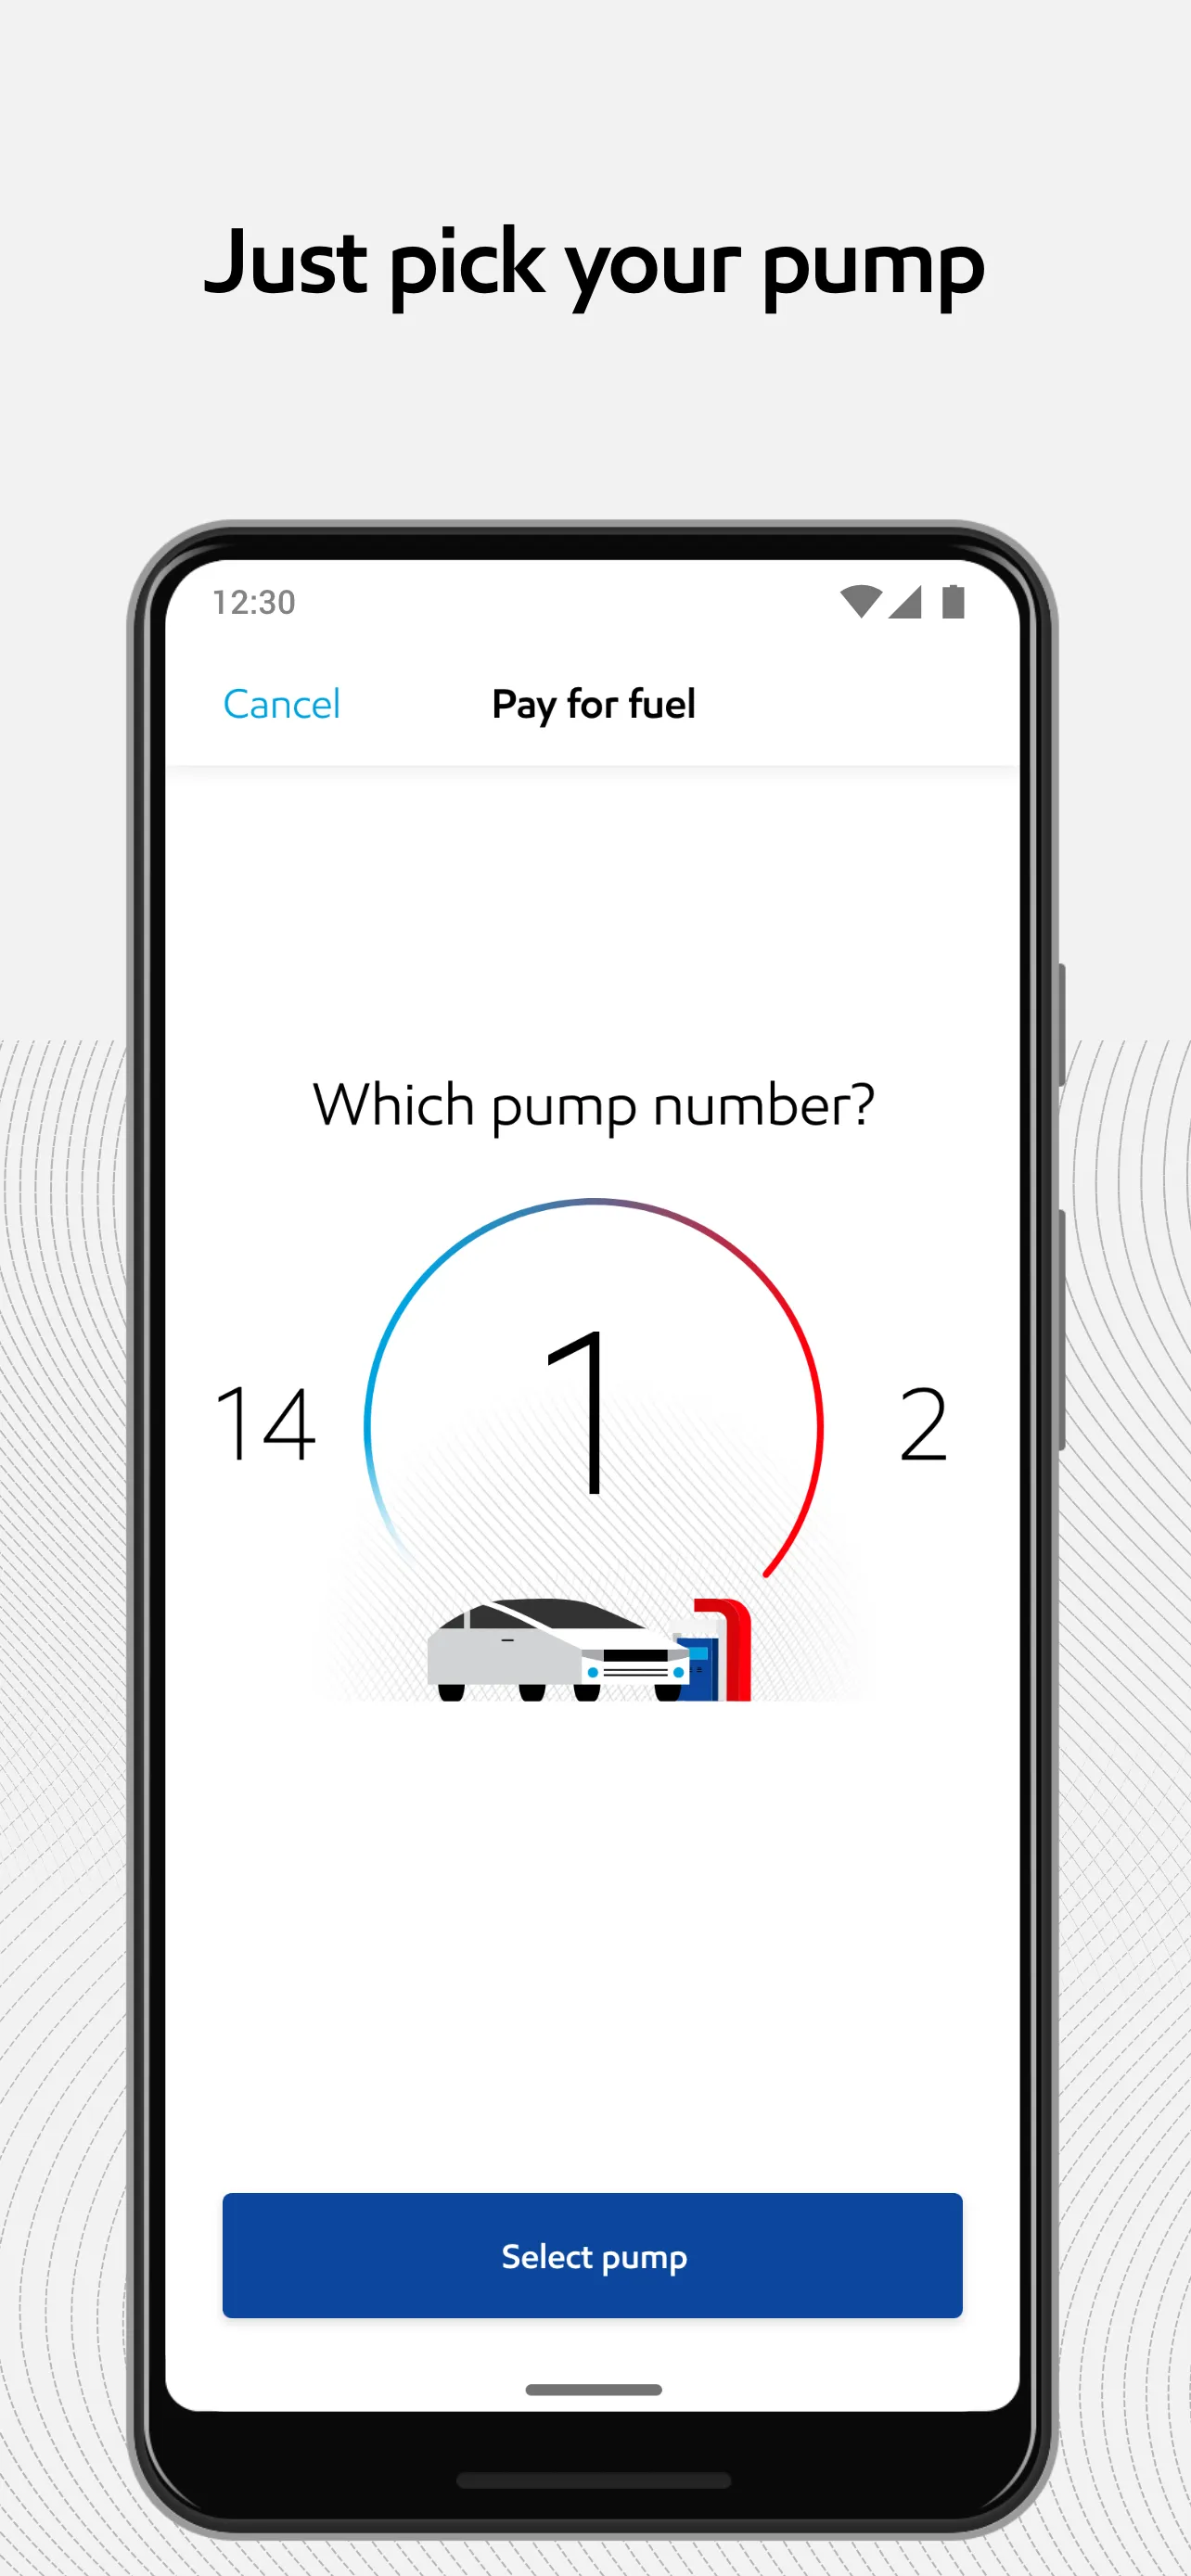 Choose a pump to pay for gas in the Exxon Mobil app